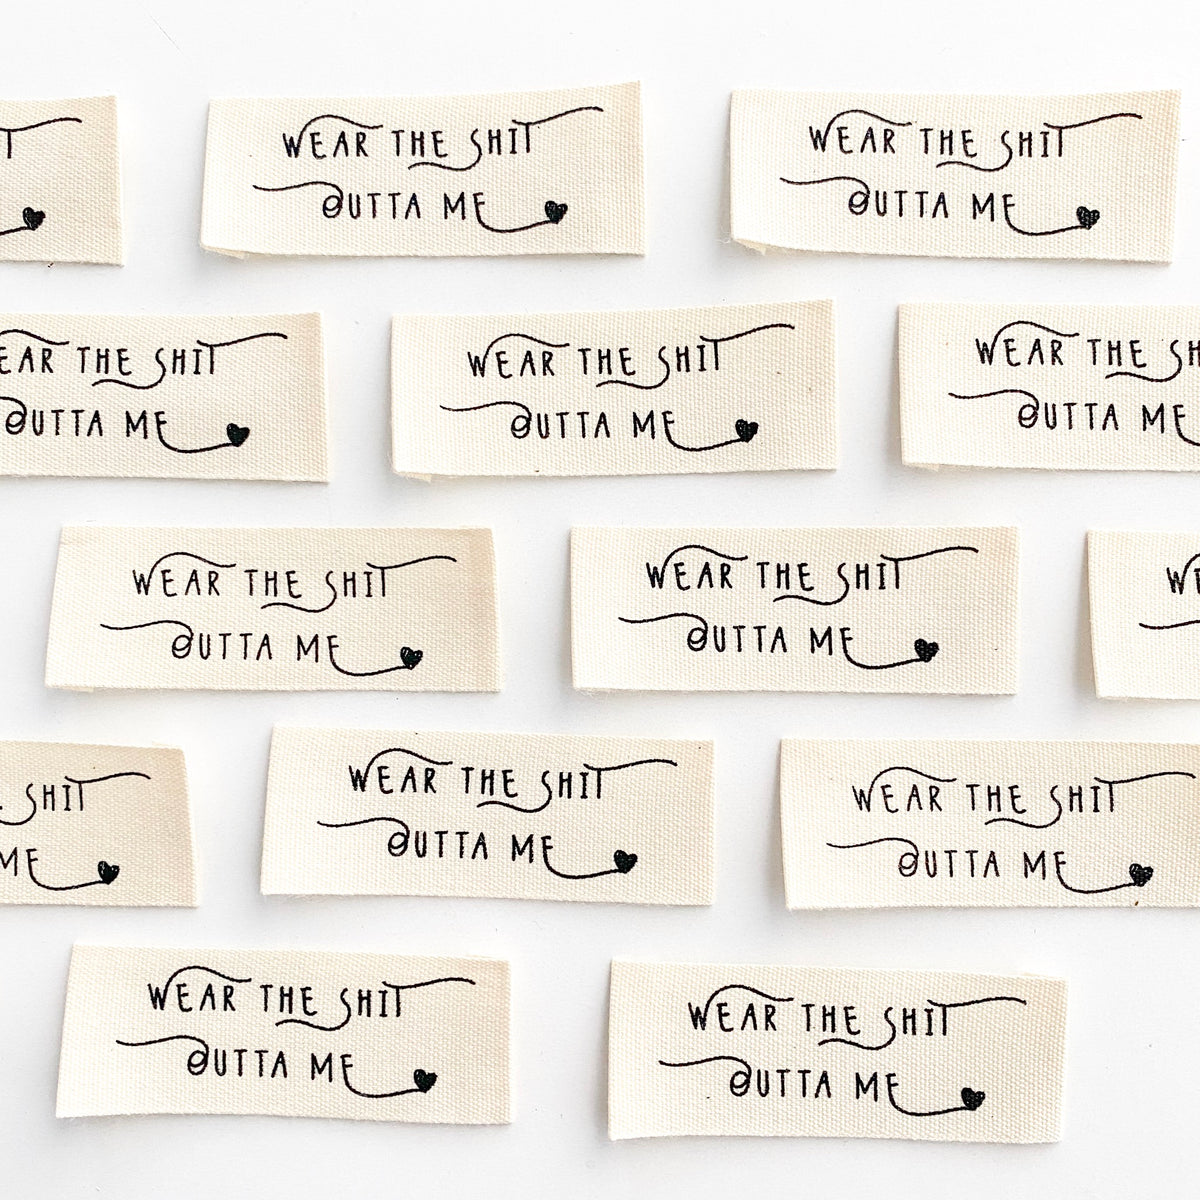 WEAR THE SH*T OUTTA ME by KATM - Pack of 10 Woven Cotton Labels